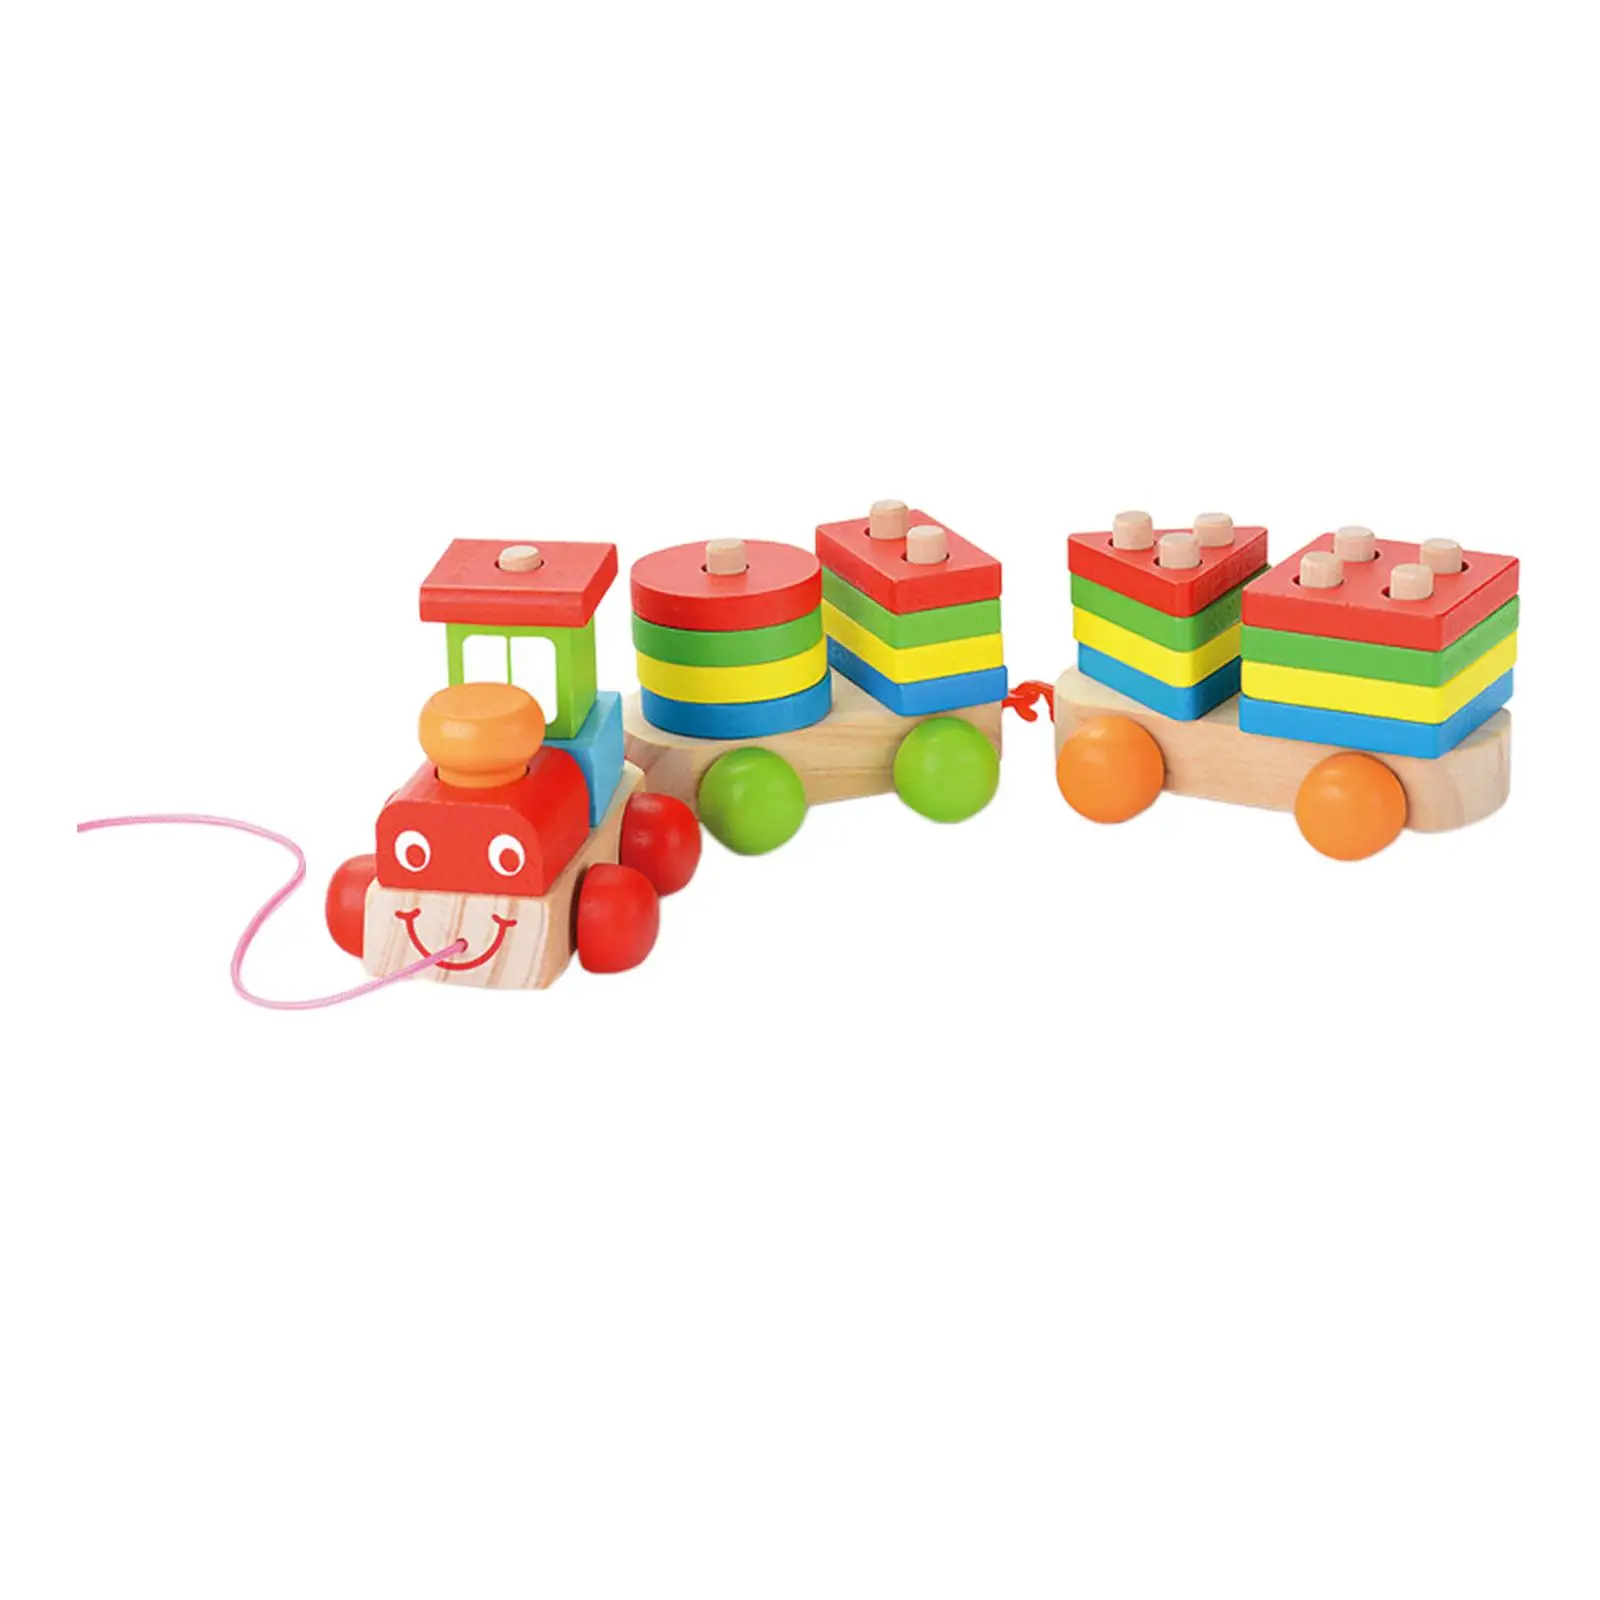 Wooden Sorting Stacking Montessori Toys Matching Puzzle Stacker for Kids Boy